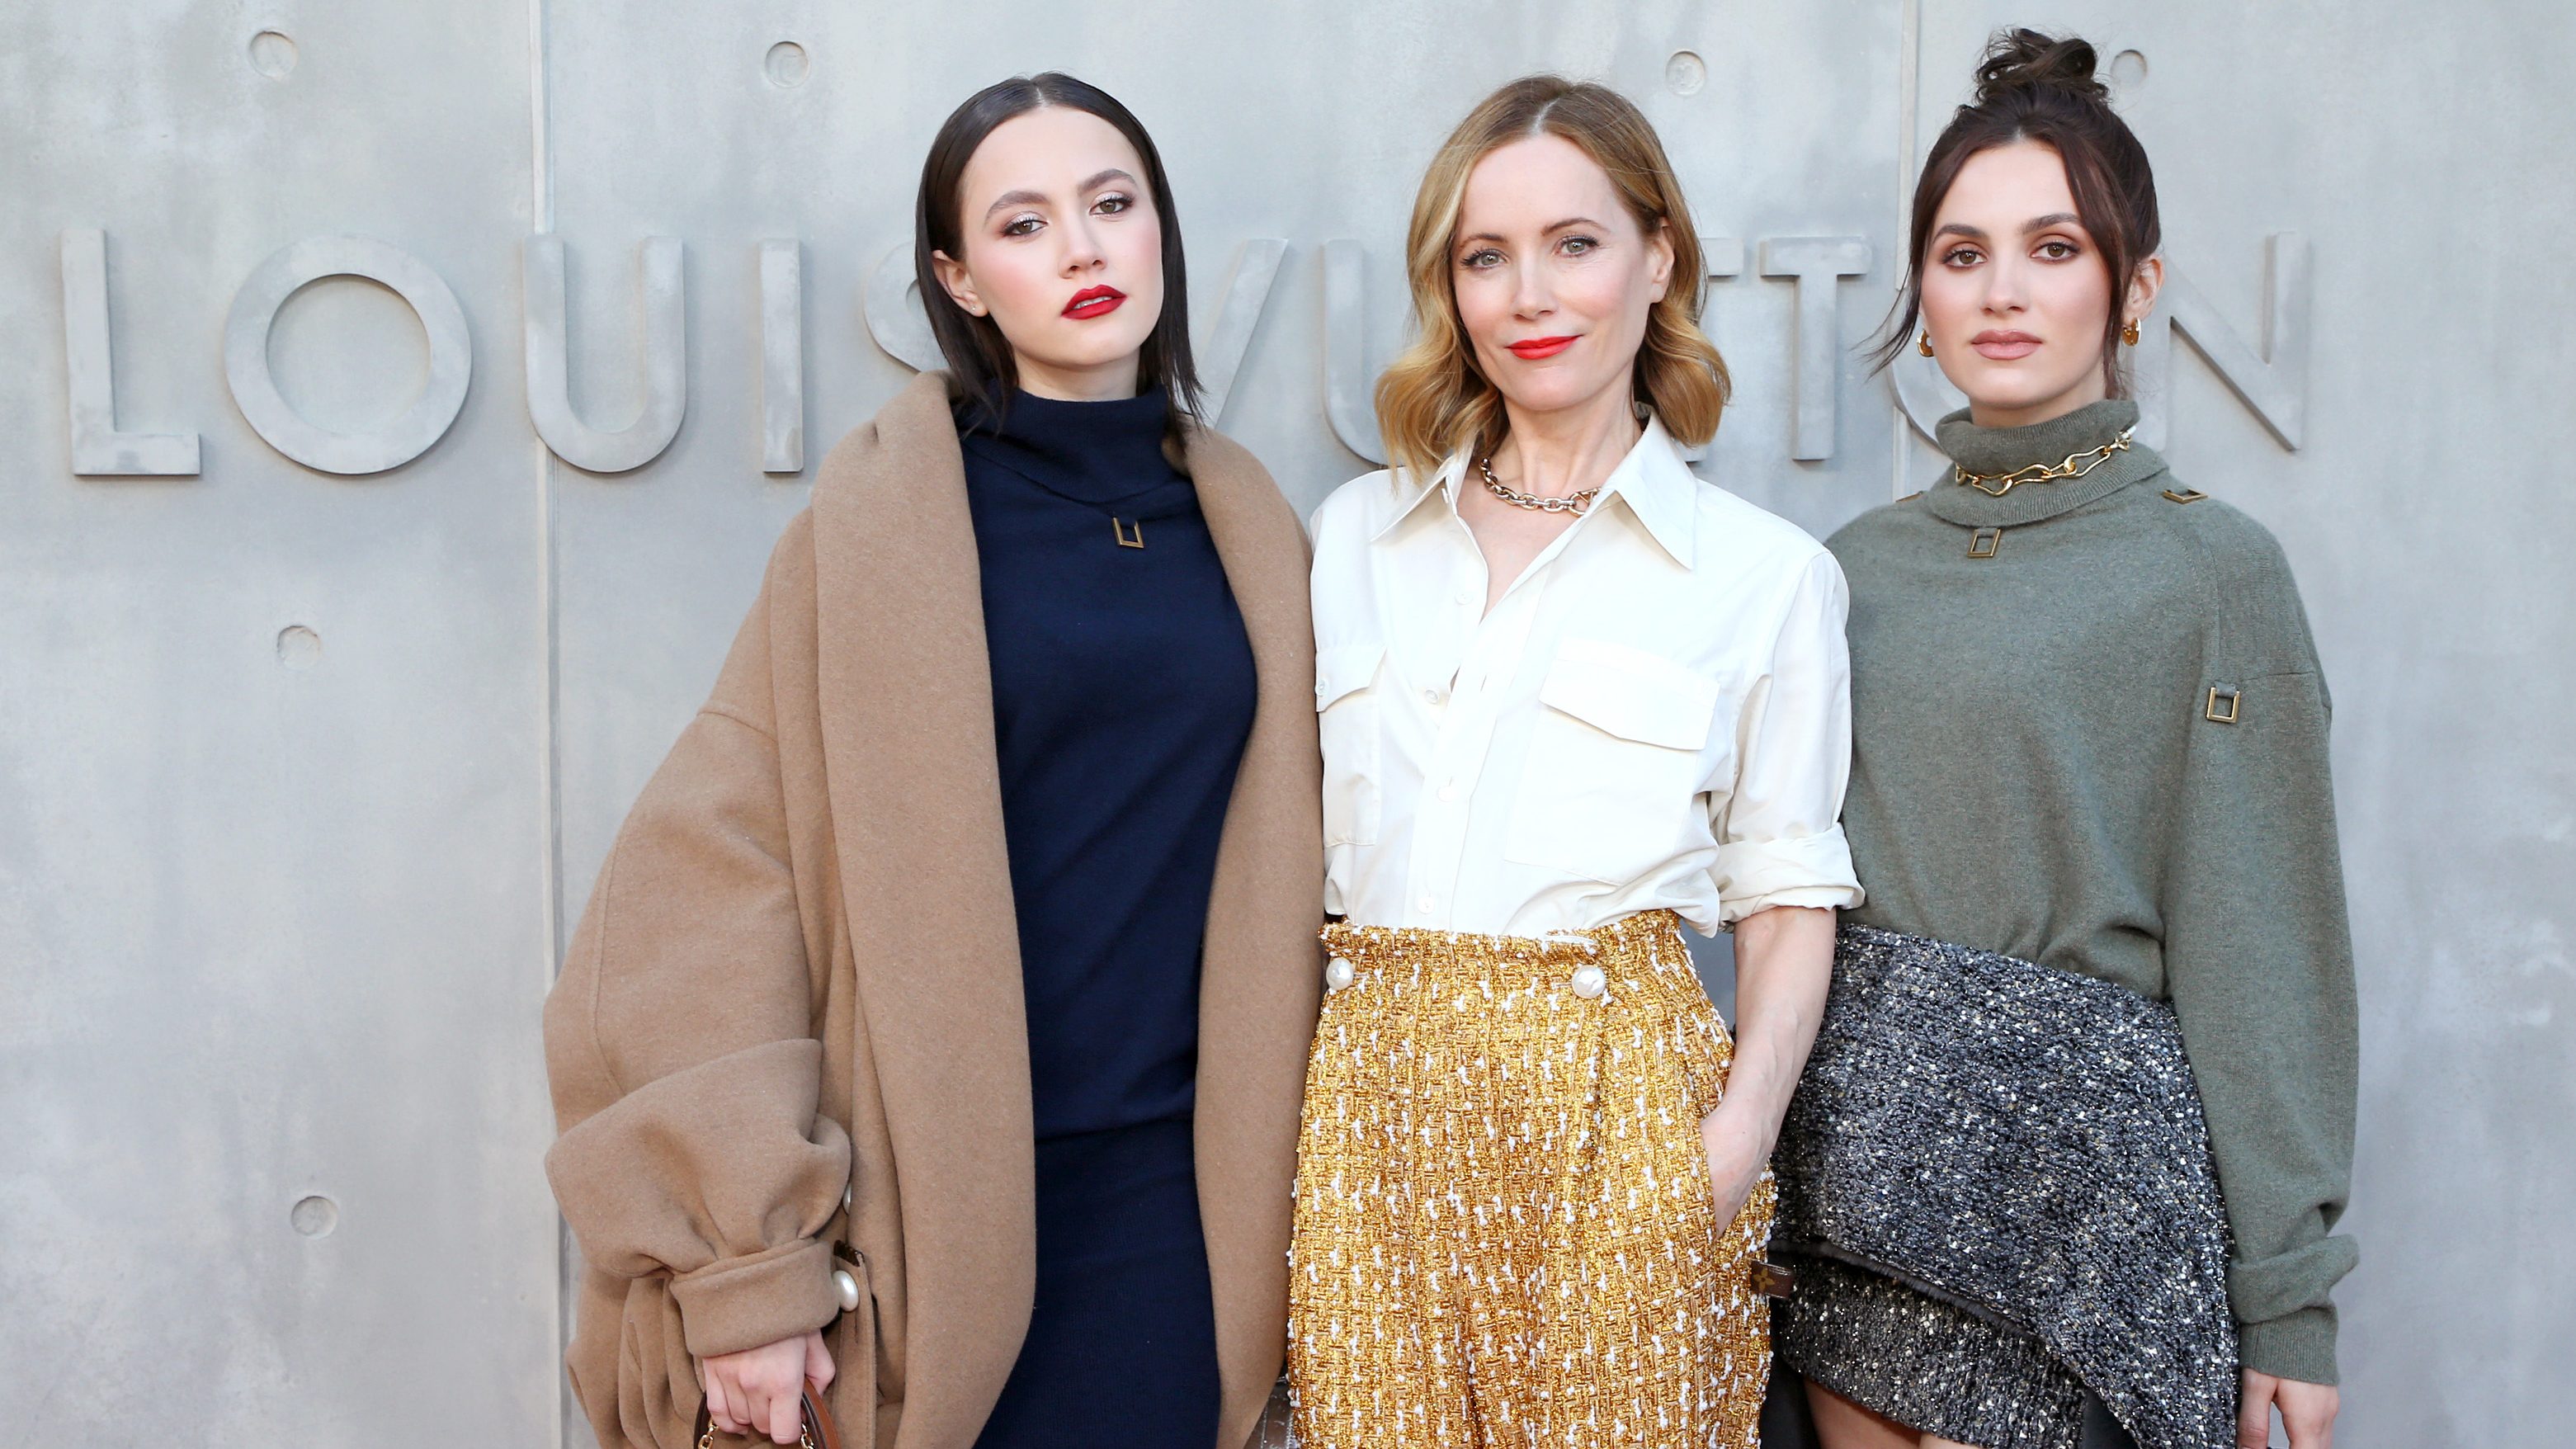 Maude Apatow, Iris Apatow and Mom Leslie Mann Attend Fashion Show